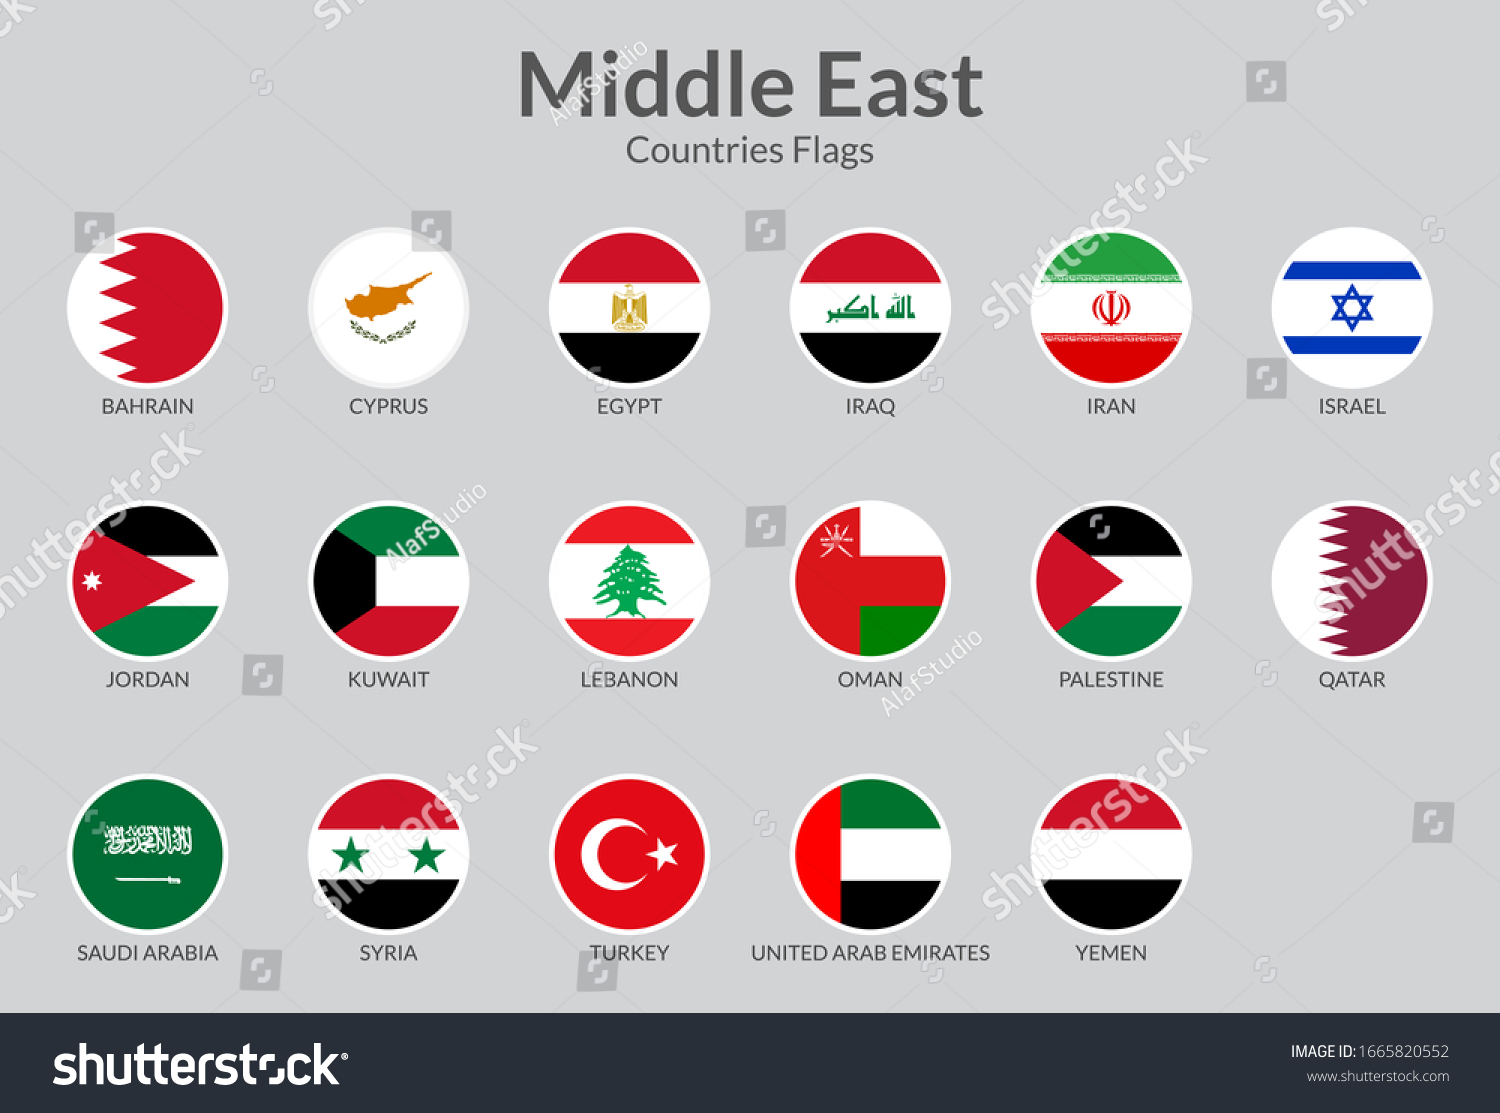 Флаг Middle East